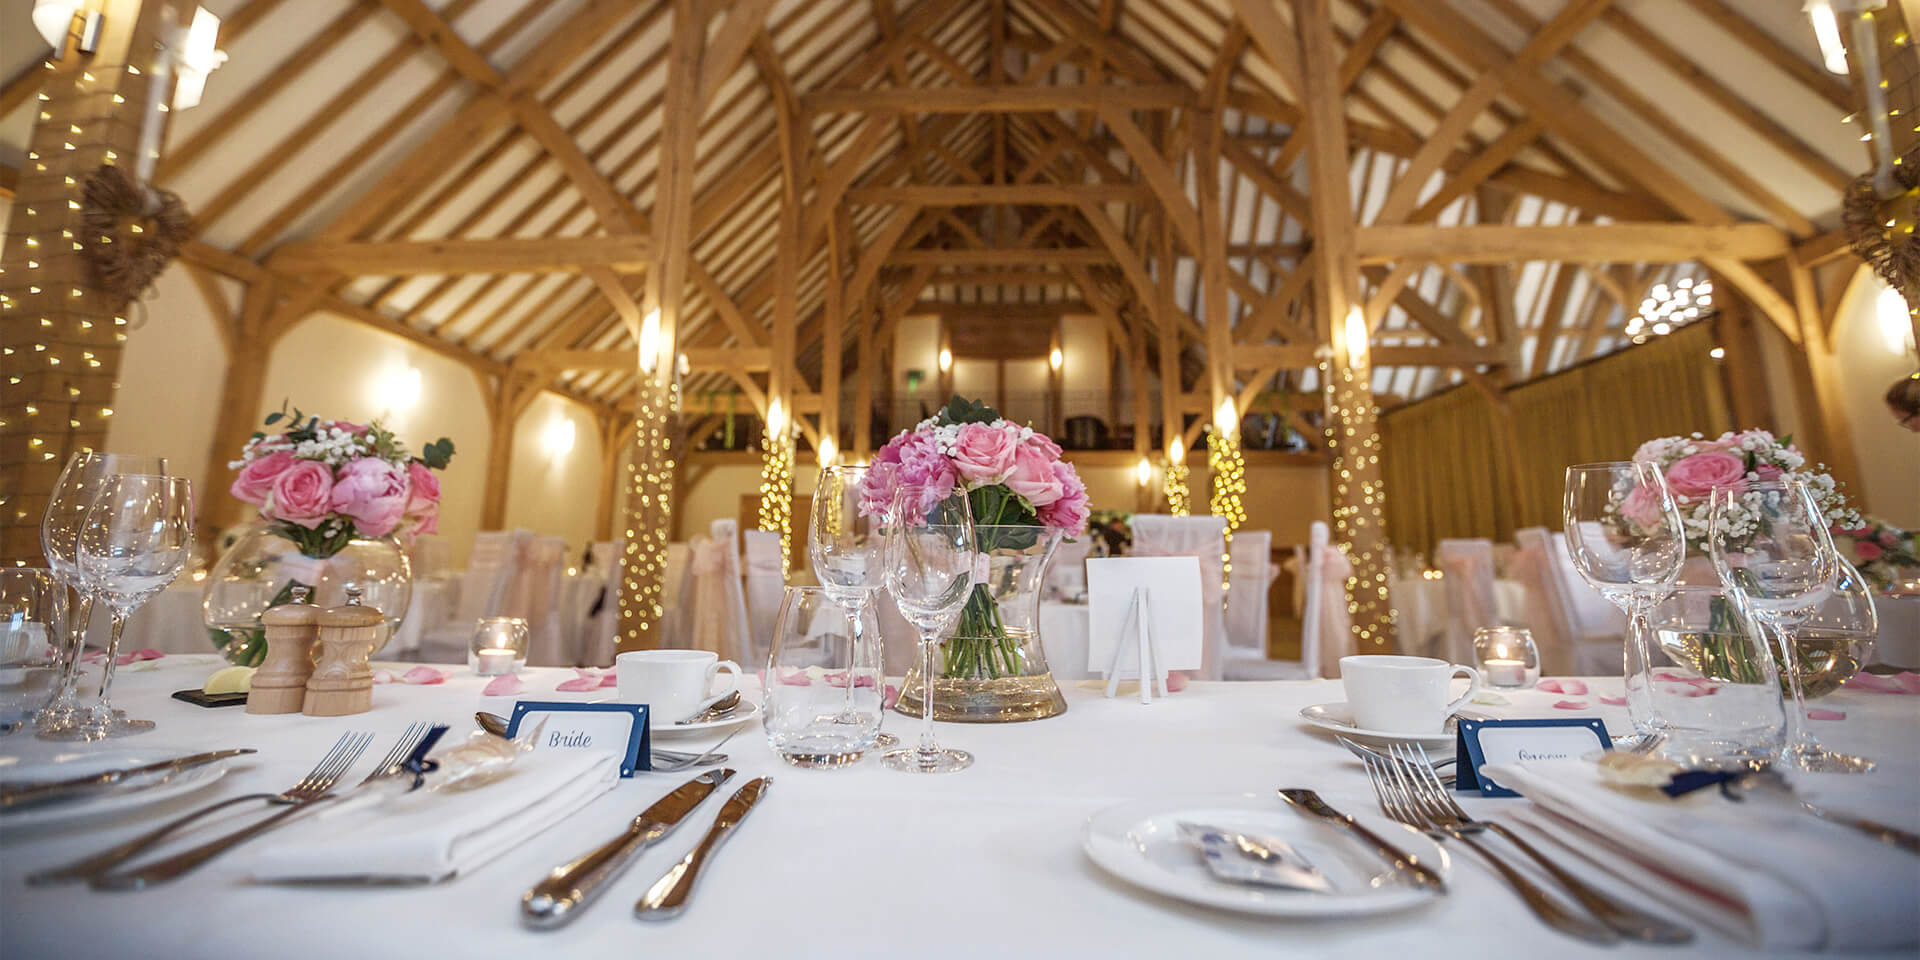 The tables in the Dining Barn were beautifully decorated ready for a spring wedding